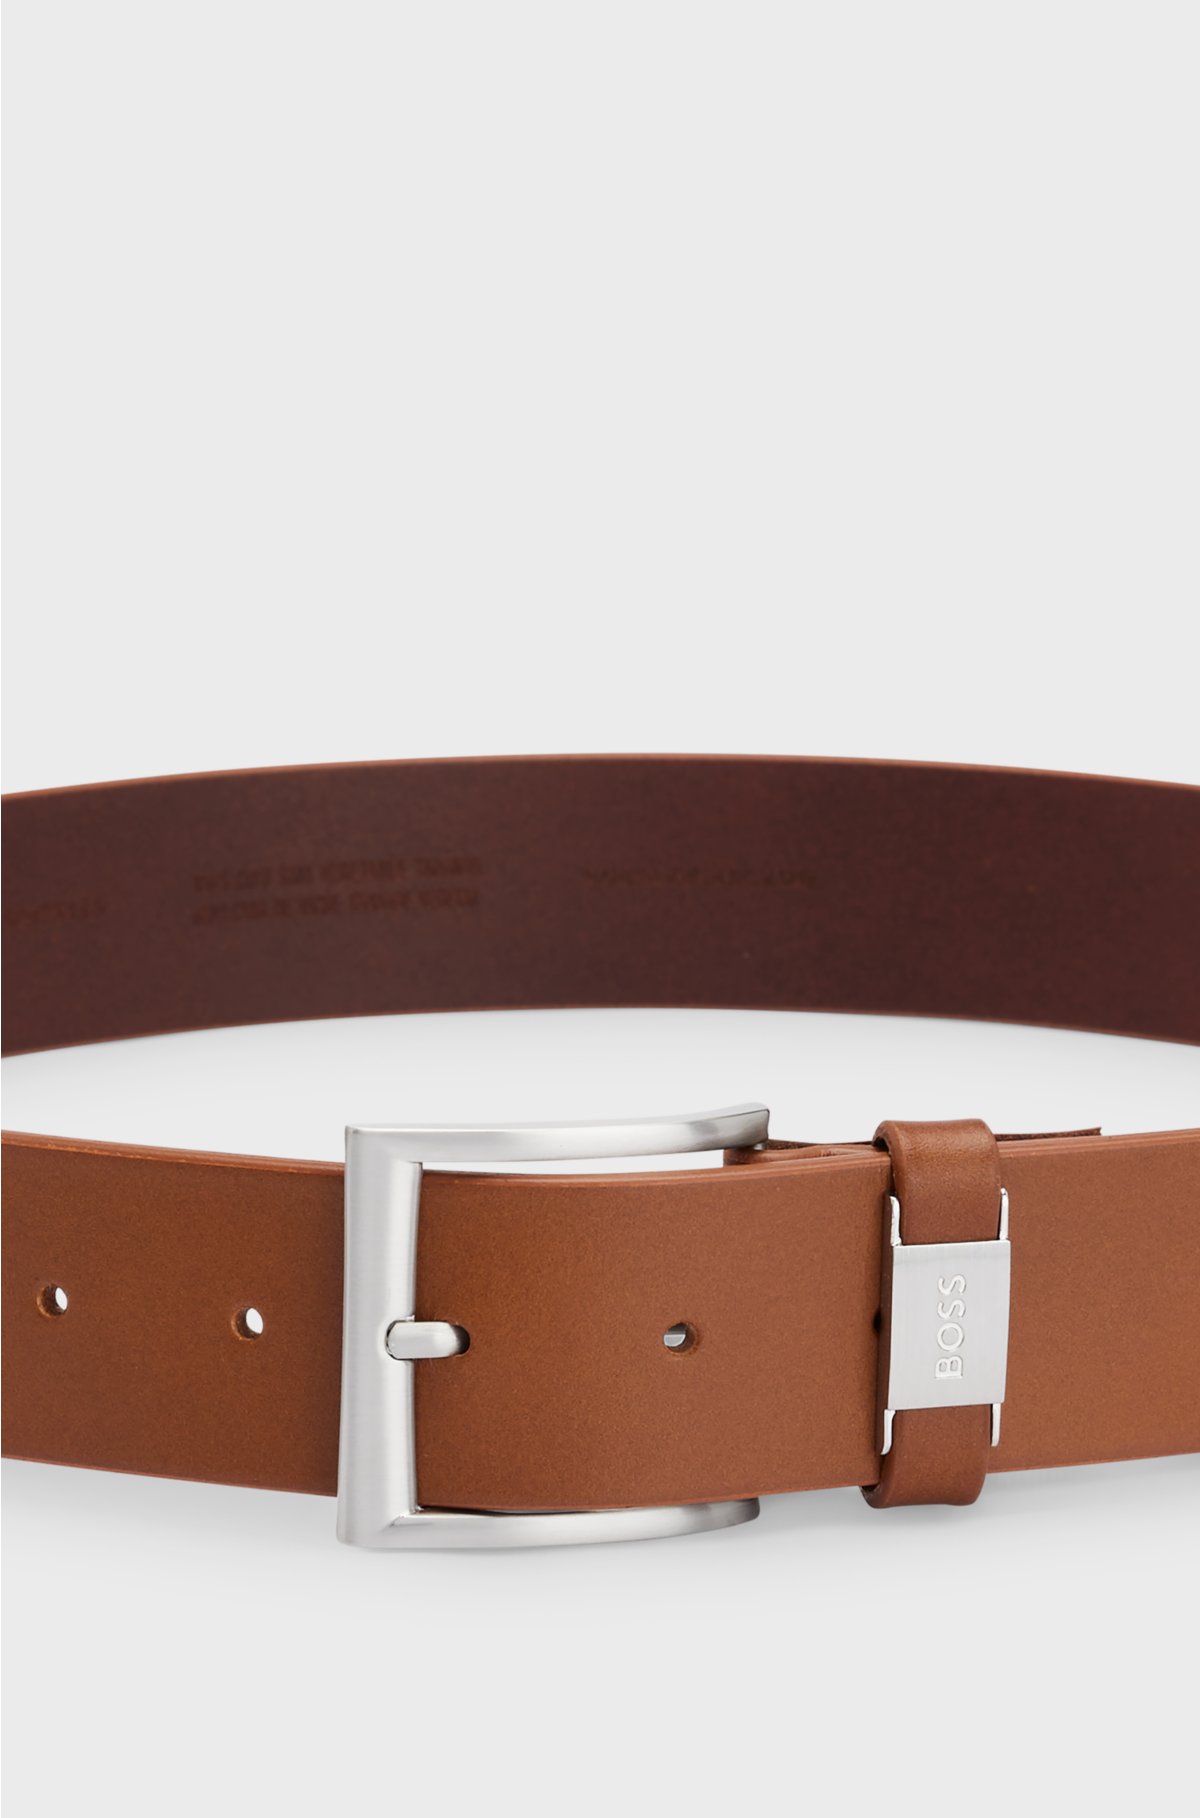 Italian-leather belt with logo keeper and brushed hardware, Brown